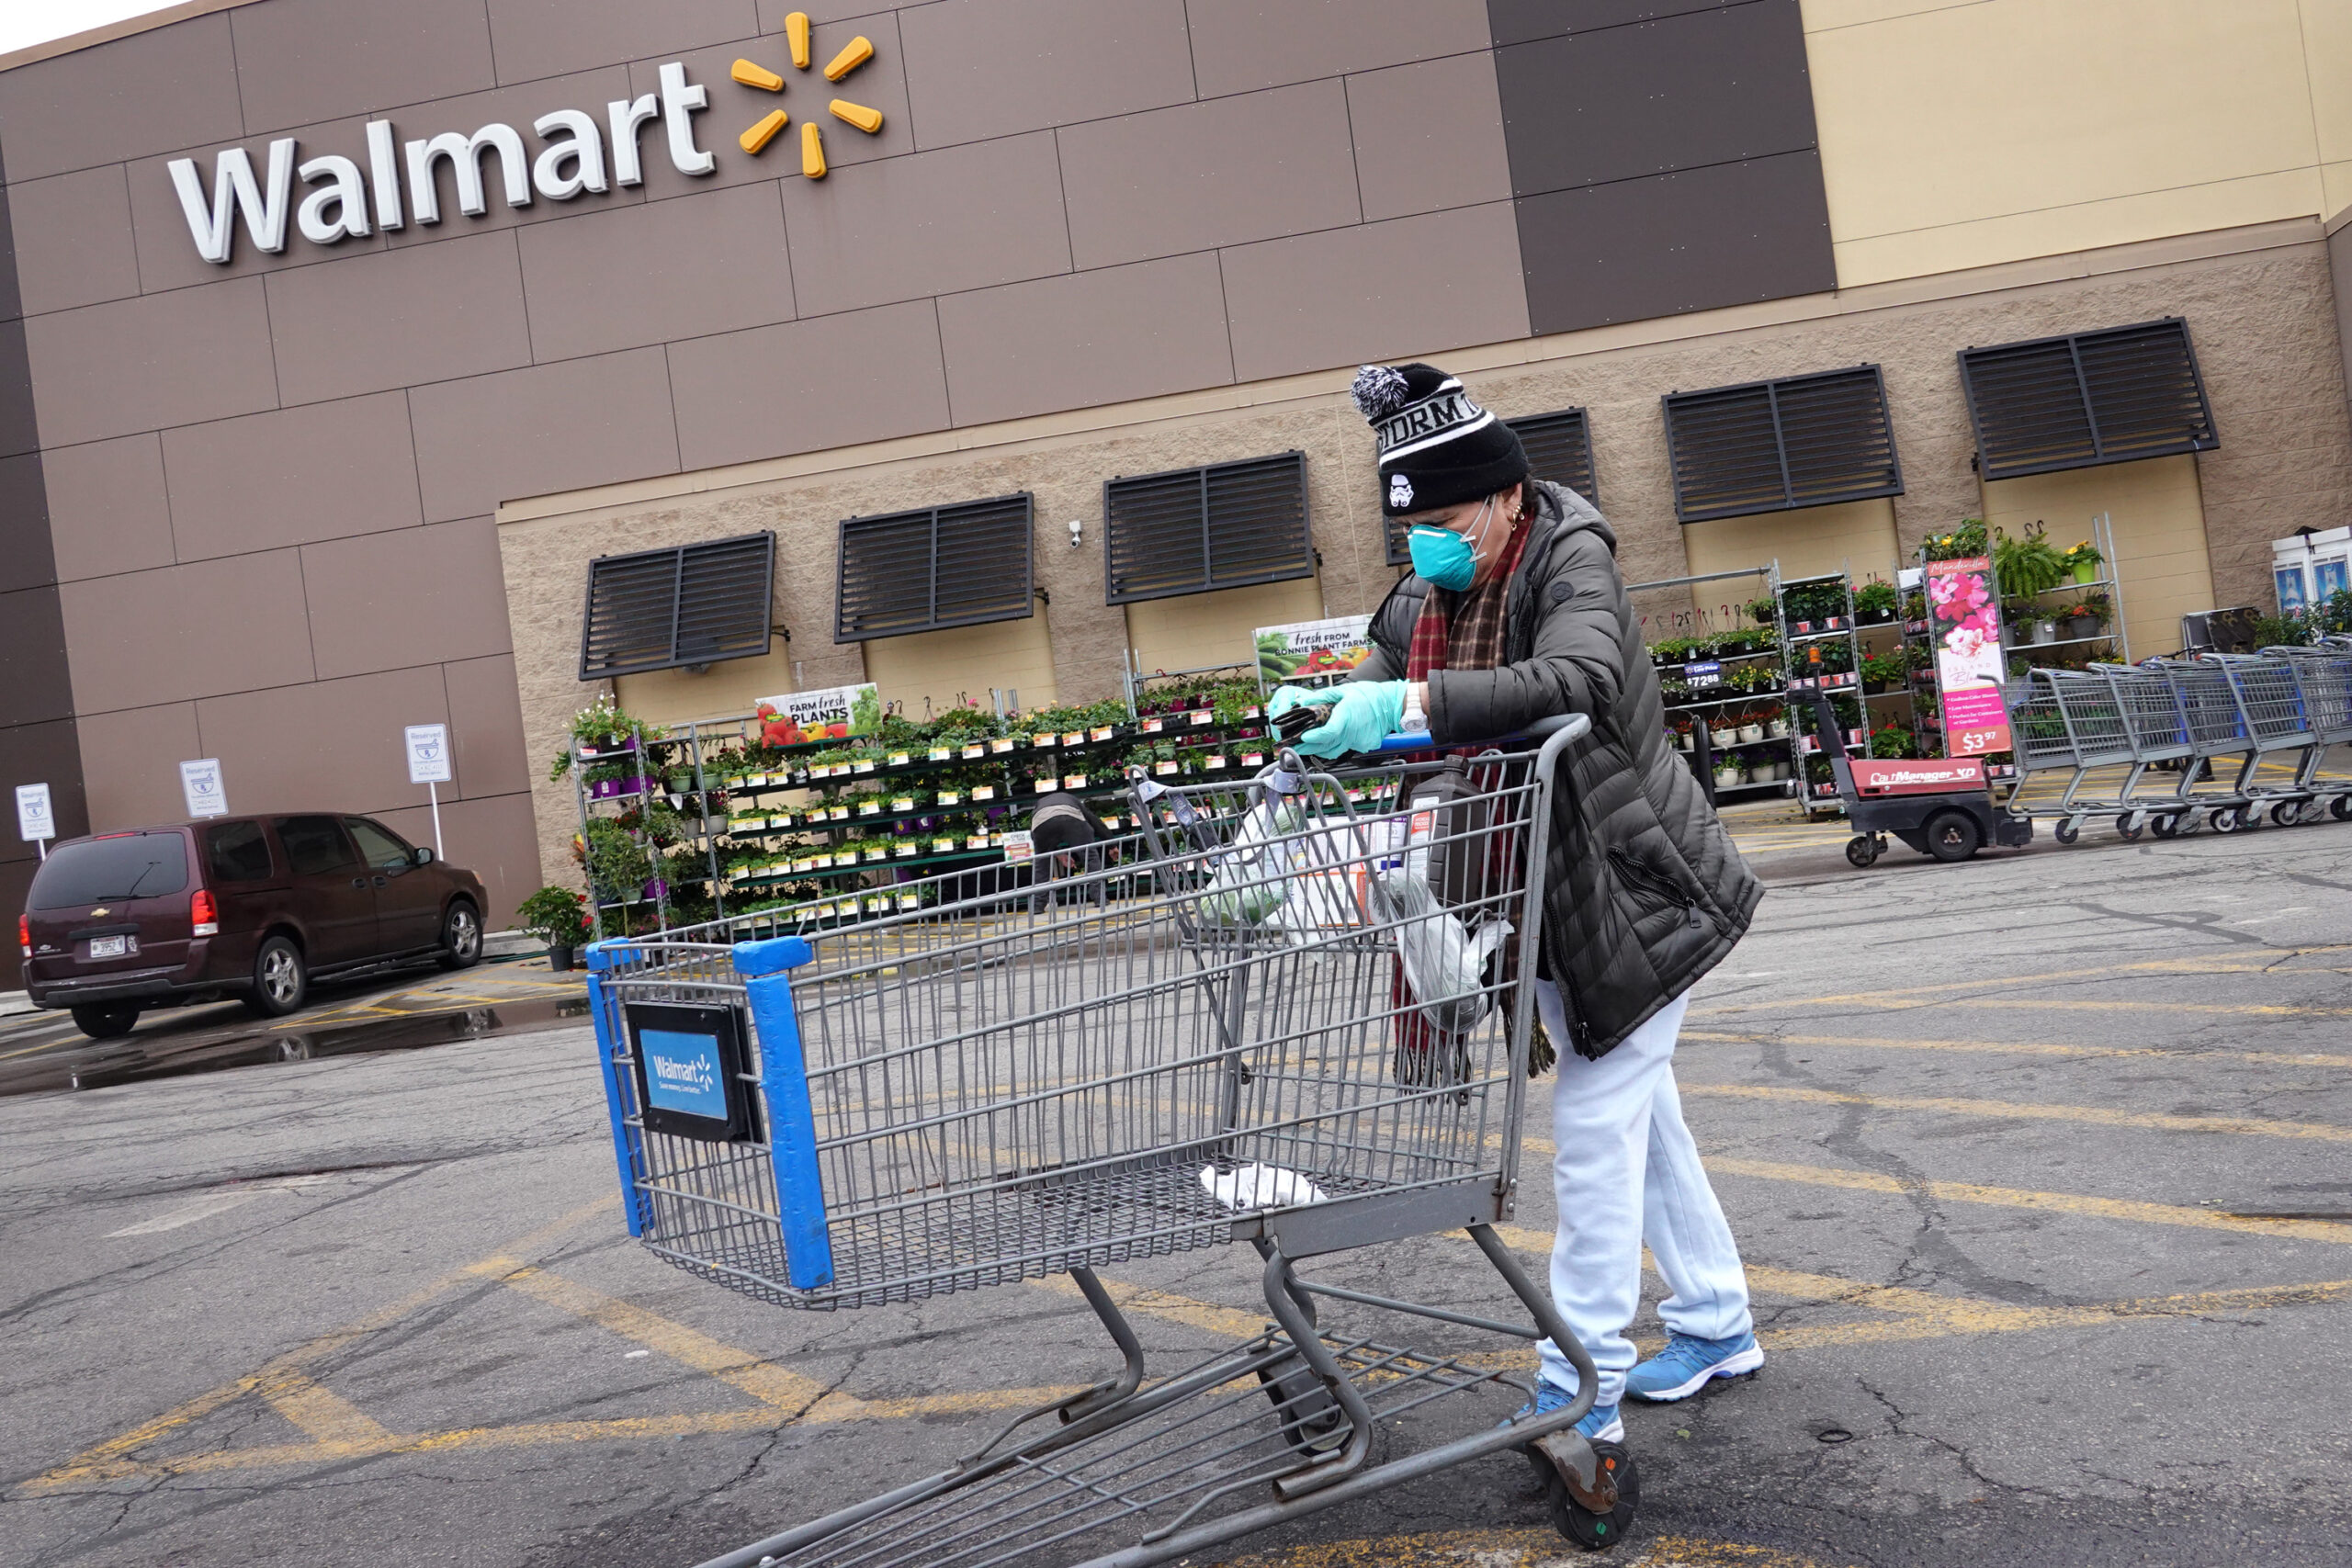 Walmart Closes Four Stores In Chicago Amid Elevated Crime Rates